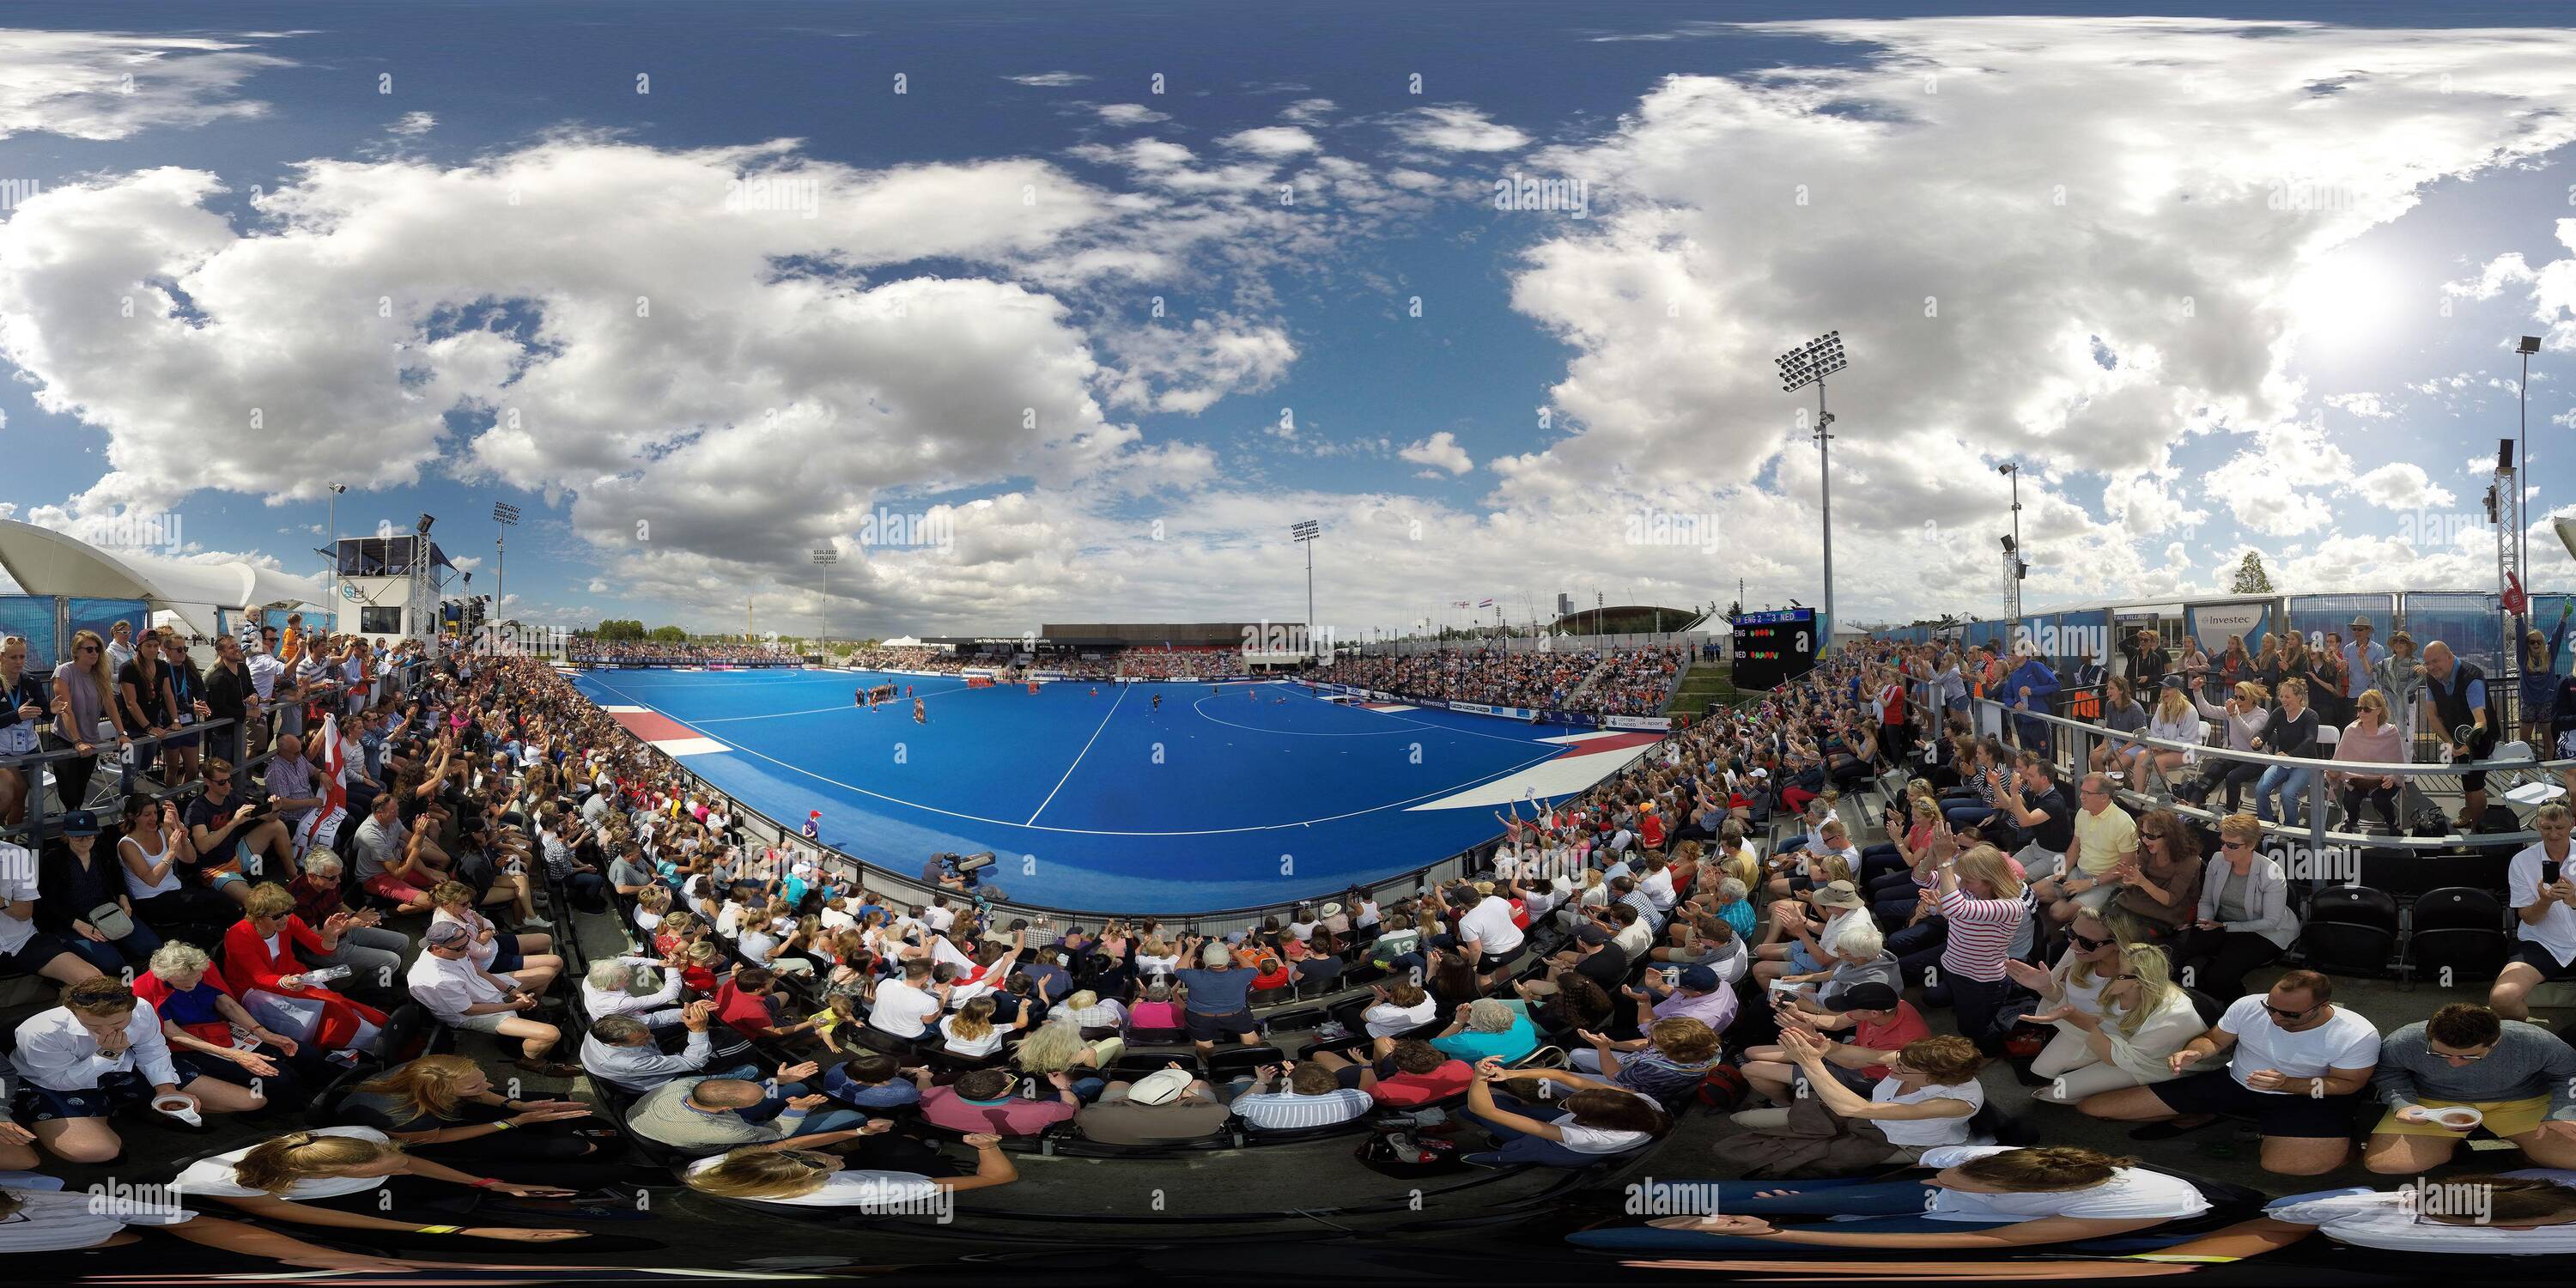 360 degree panoramic view of ANDY MURRAY DURING HIS GAME WITH JORDAN THOMPSON AT THE AEGON TENNIS CHAMPIONSHIPS,QUEENS CLUB, LONDON. PICTURE CREDIT:  © MARK PAIN / ALAMY